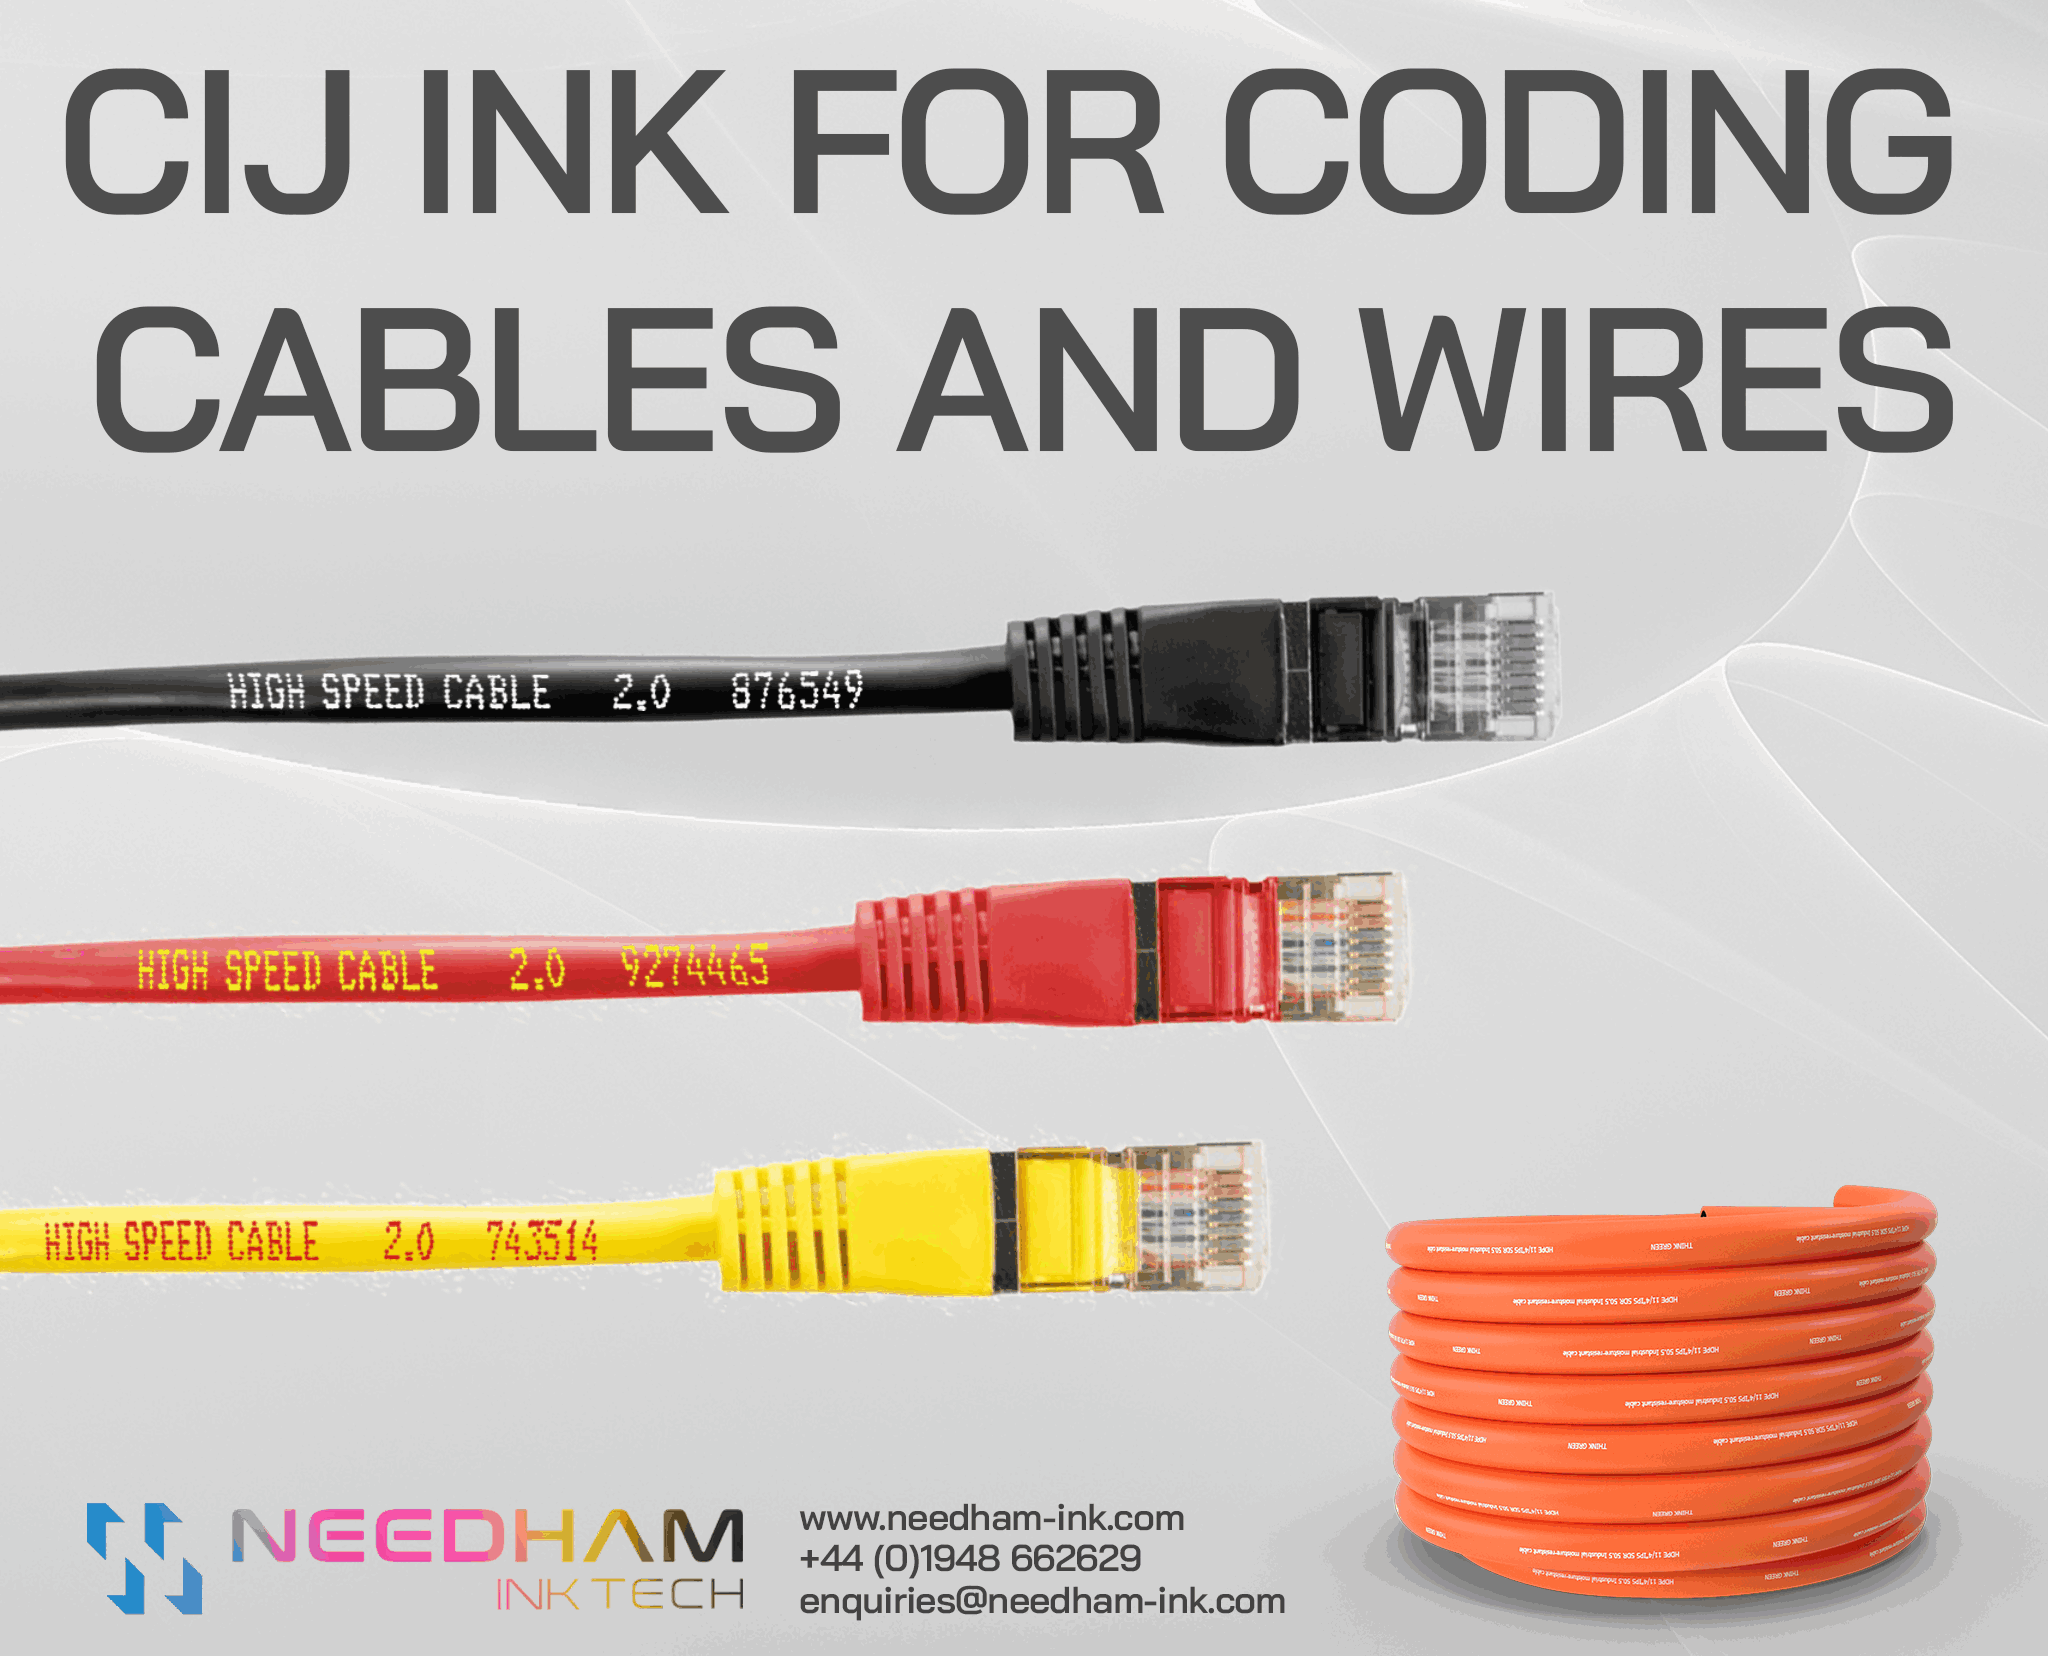 Improving reliability when coding on to wires and cables